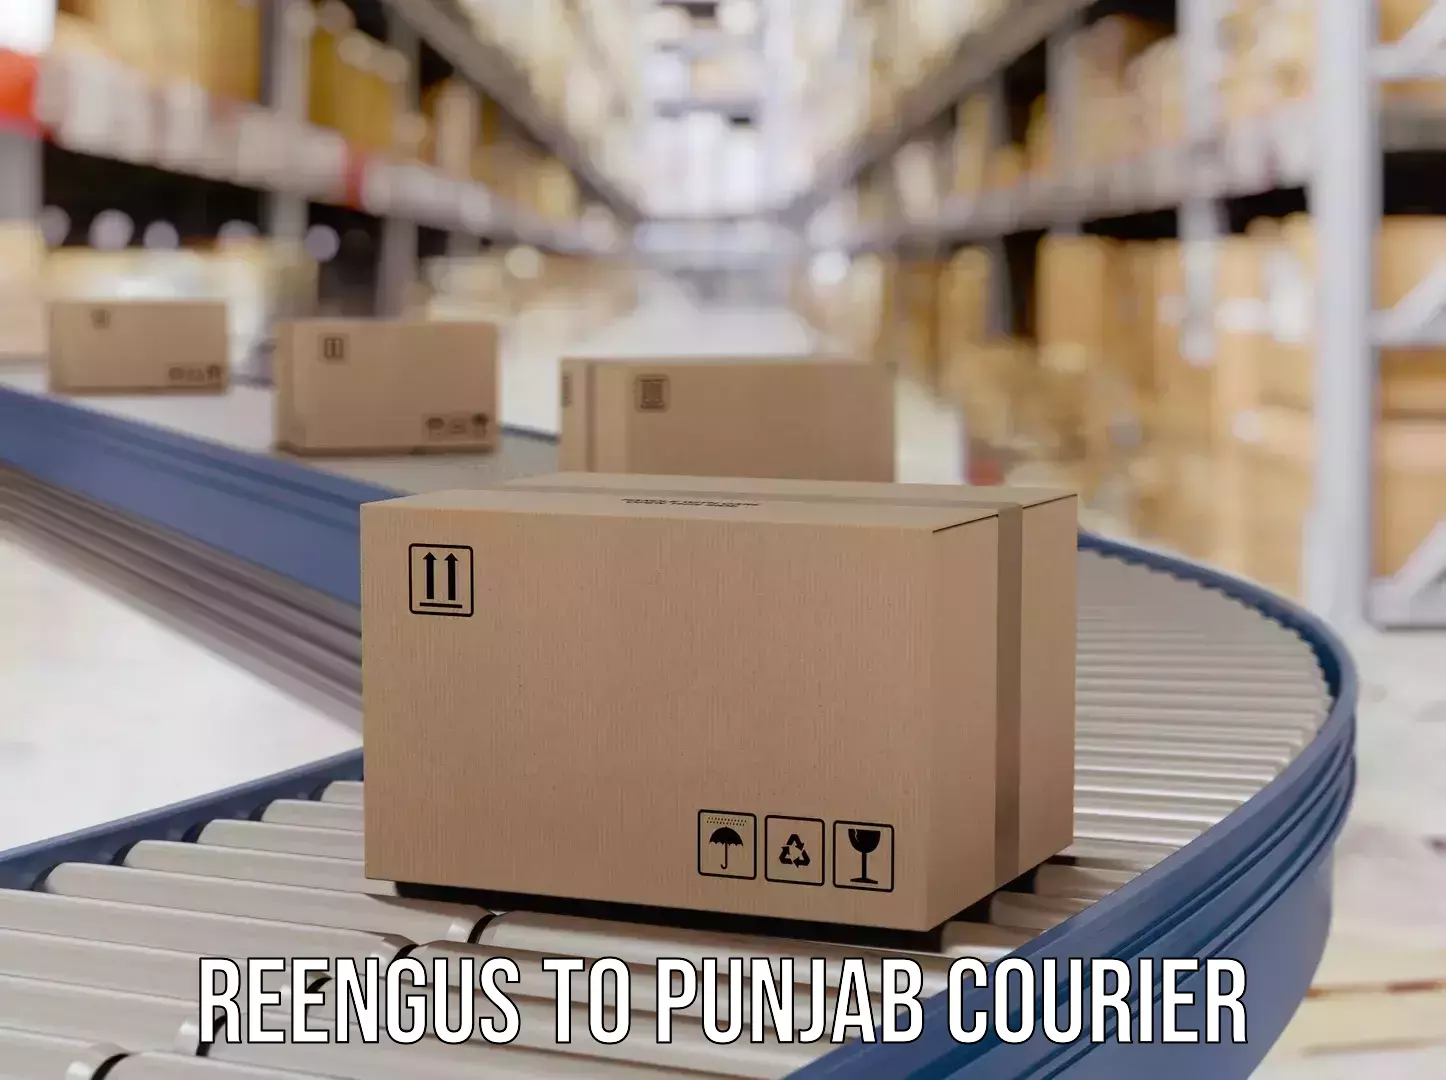 Delivery service partnership in Reengus to Punjab